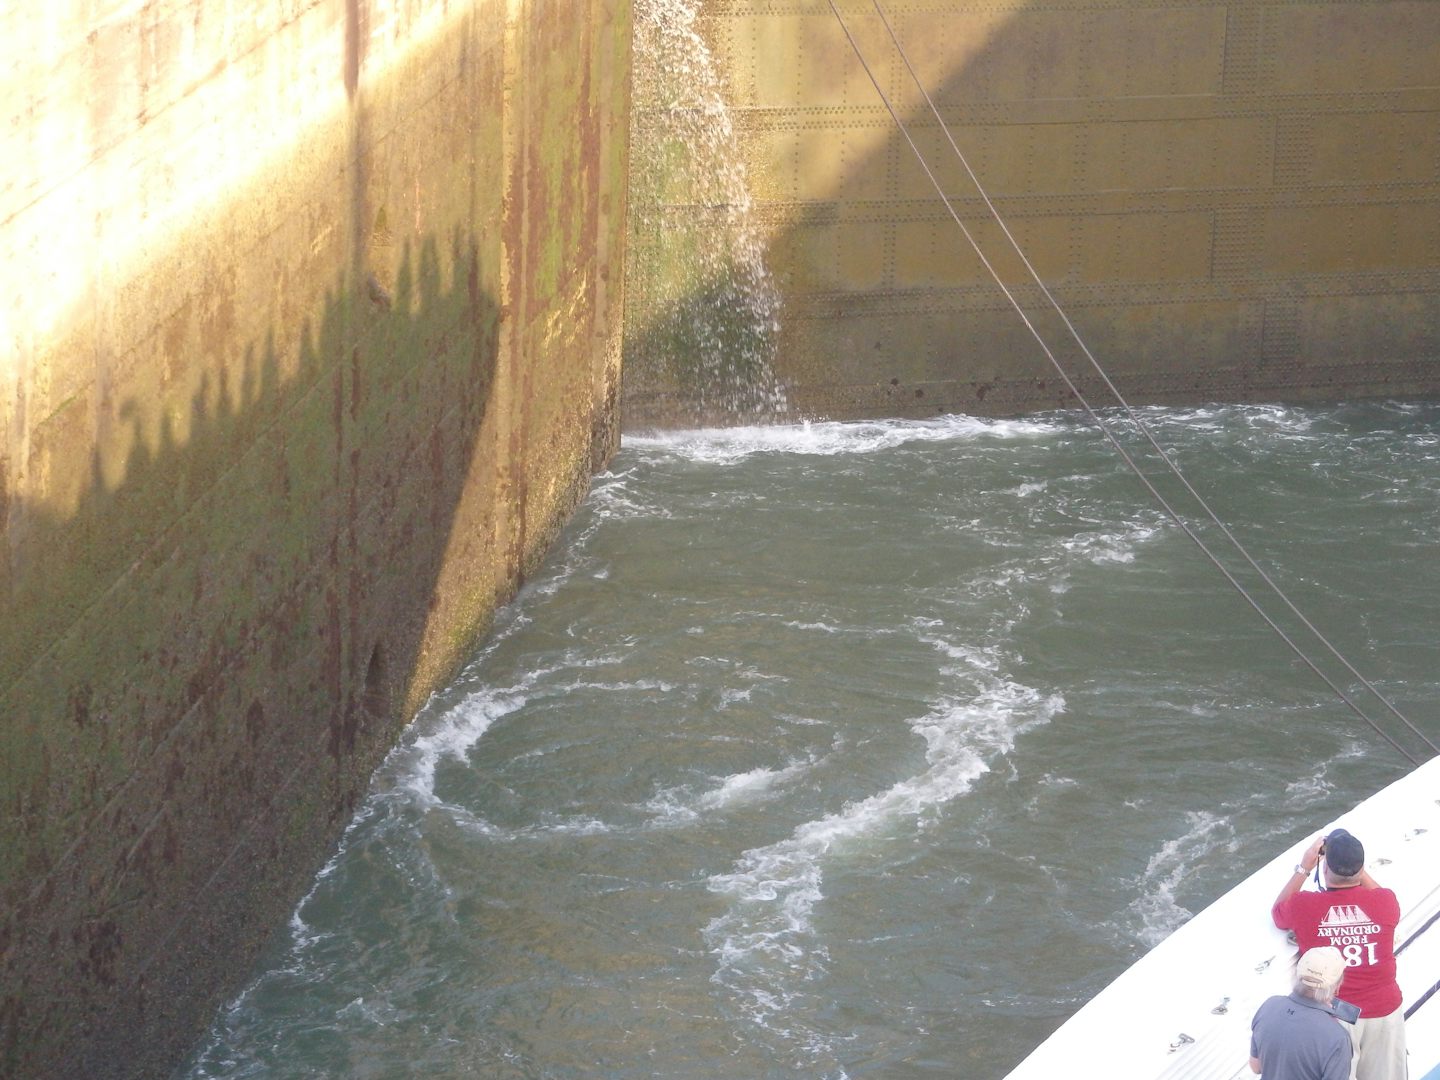 Lock chamber filling with water